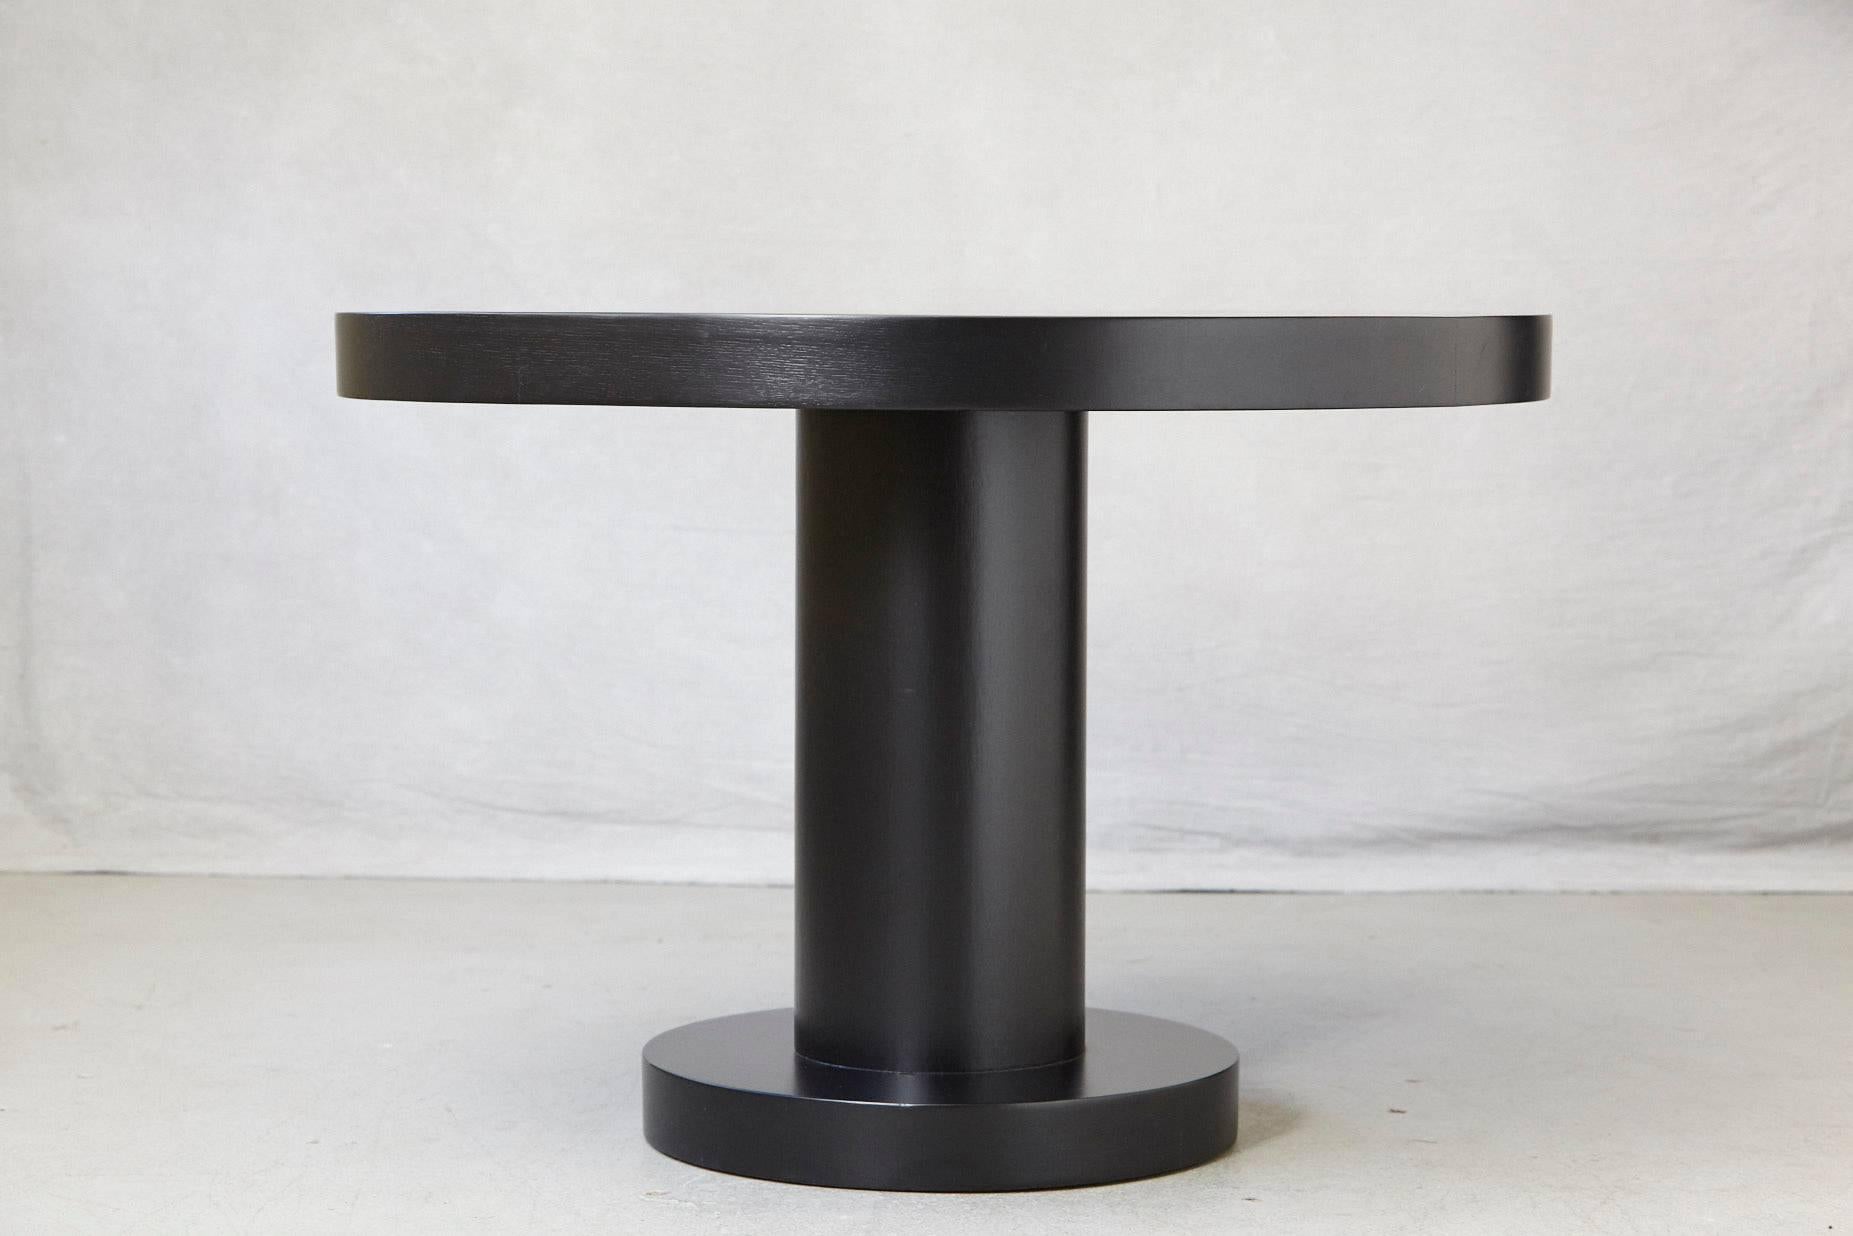 Modern, timeless oak center table in a new black satin finish. A pure and minimalistic appearance, a very solid quality construction. The table dates back to the 1960's has been professionally lacquered and is in excellent condition.
Dimensions: